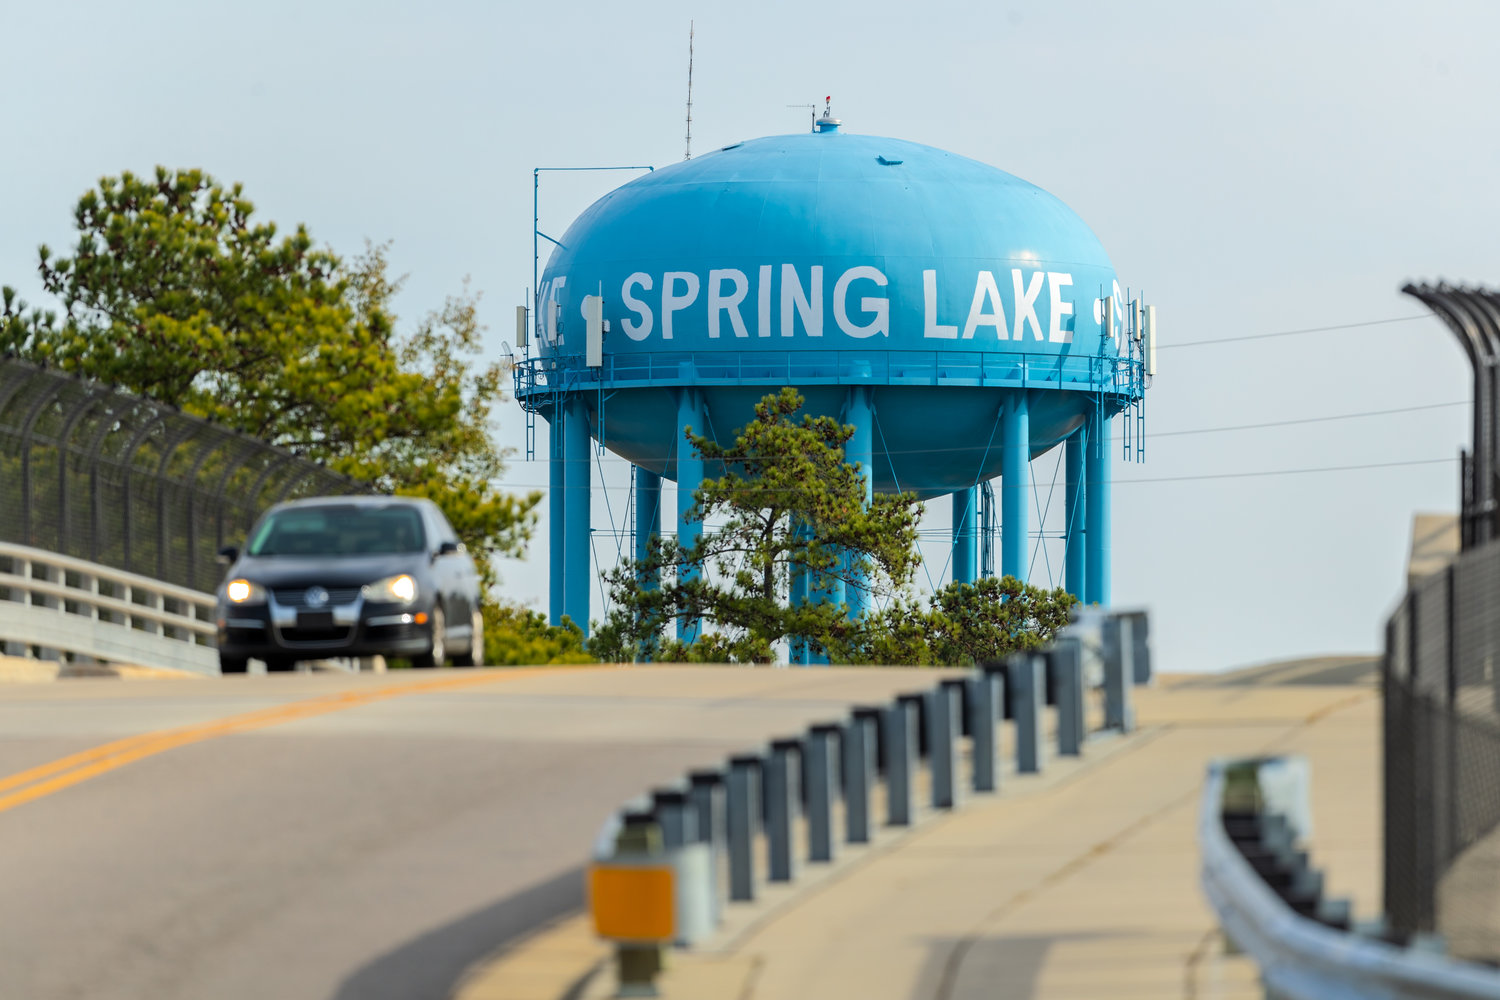 Hiring a new town manager and a finance director are among the top goals the Spring Lake Board of Aldermen hopes to achieve as the new year begins.